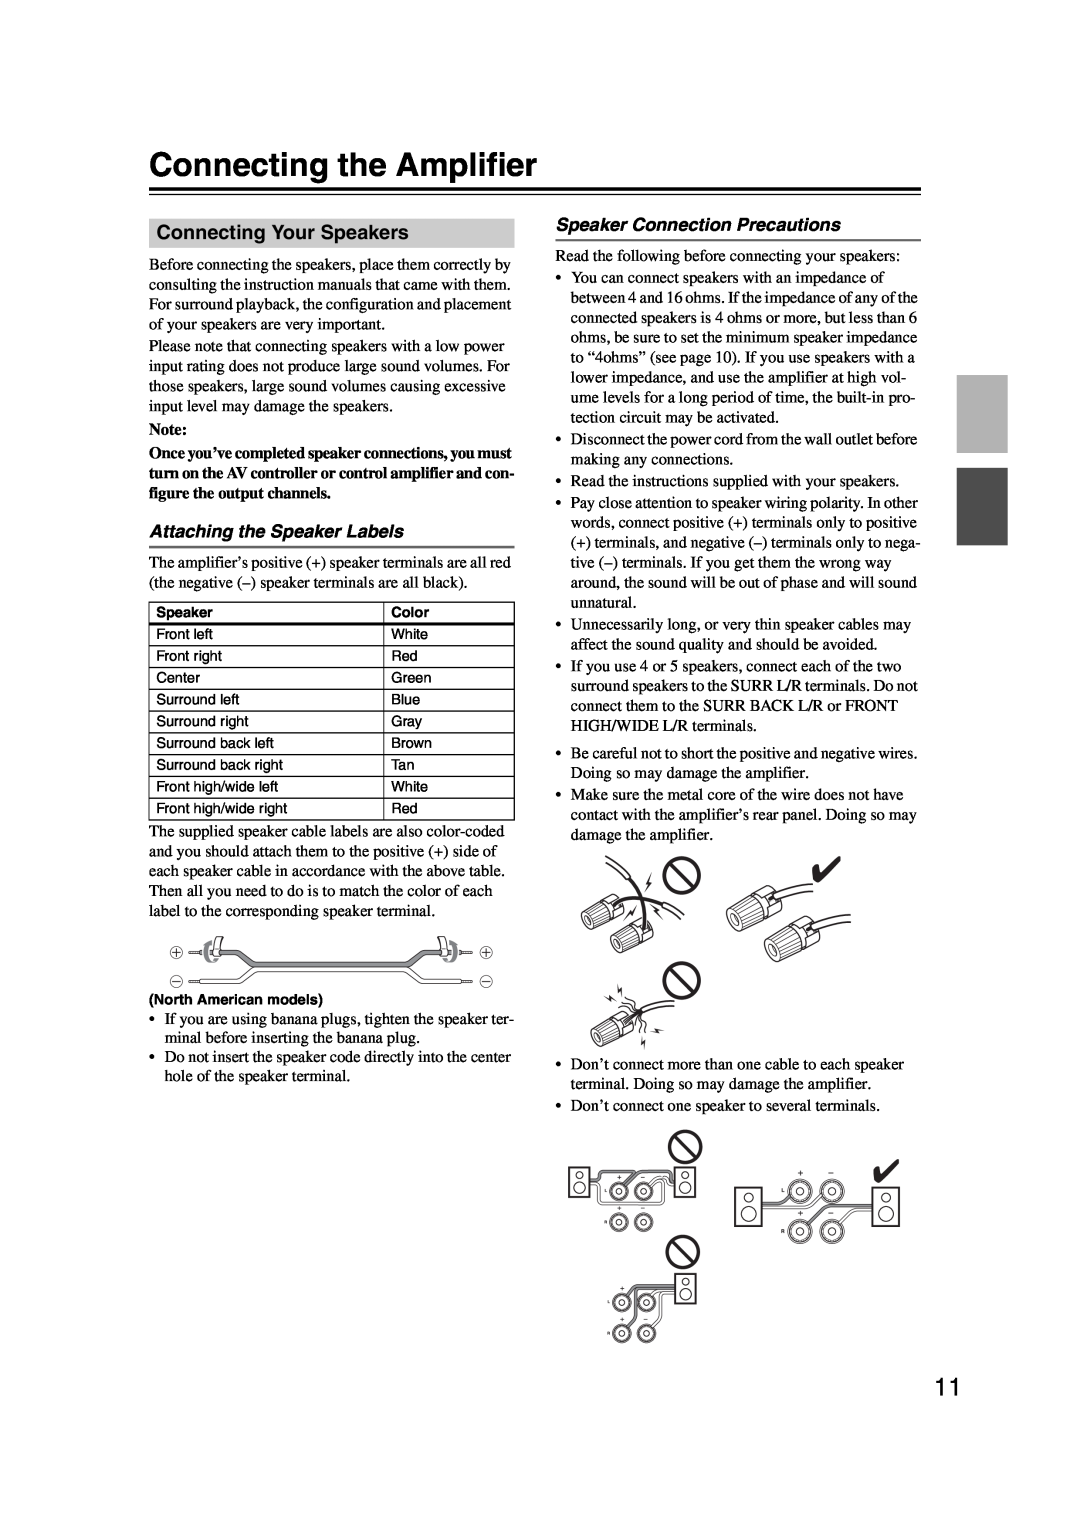 Onkyo PA-MC5500 instruction manual Connecting the Amplifier, Connecting Your Speakers, Attaching the Speaker Labels 